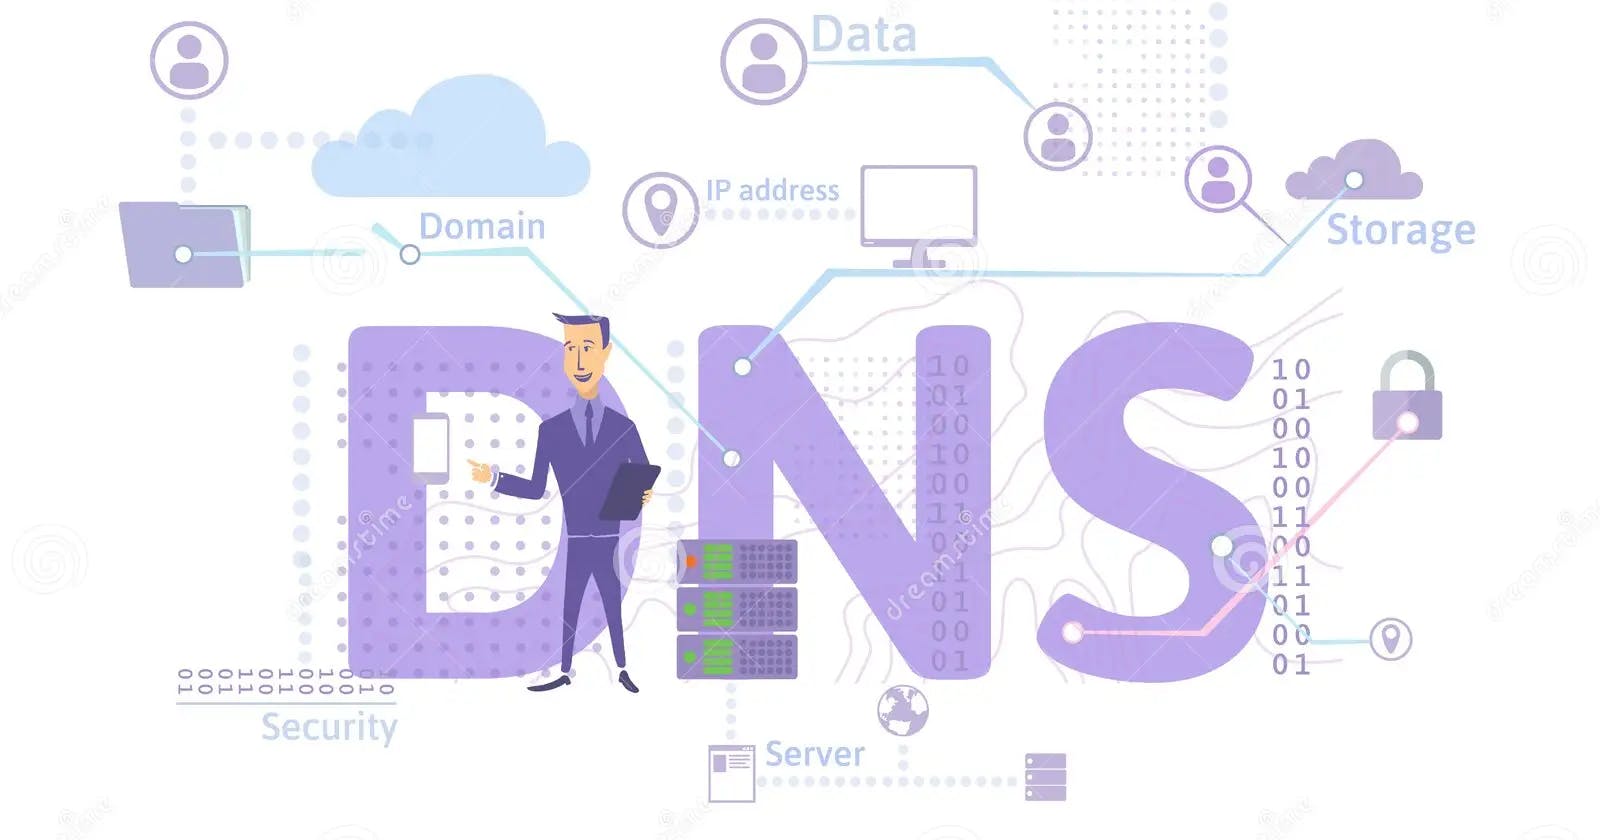 DNS(Domain Name System): The Unsung Hero Behind Every Webpage You Visit